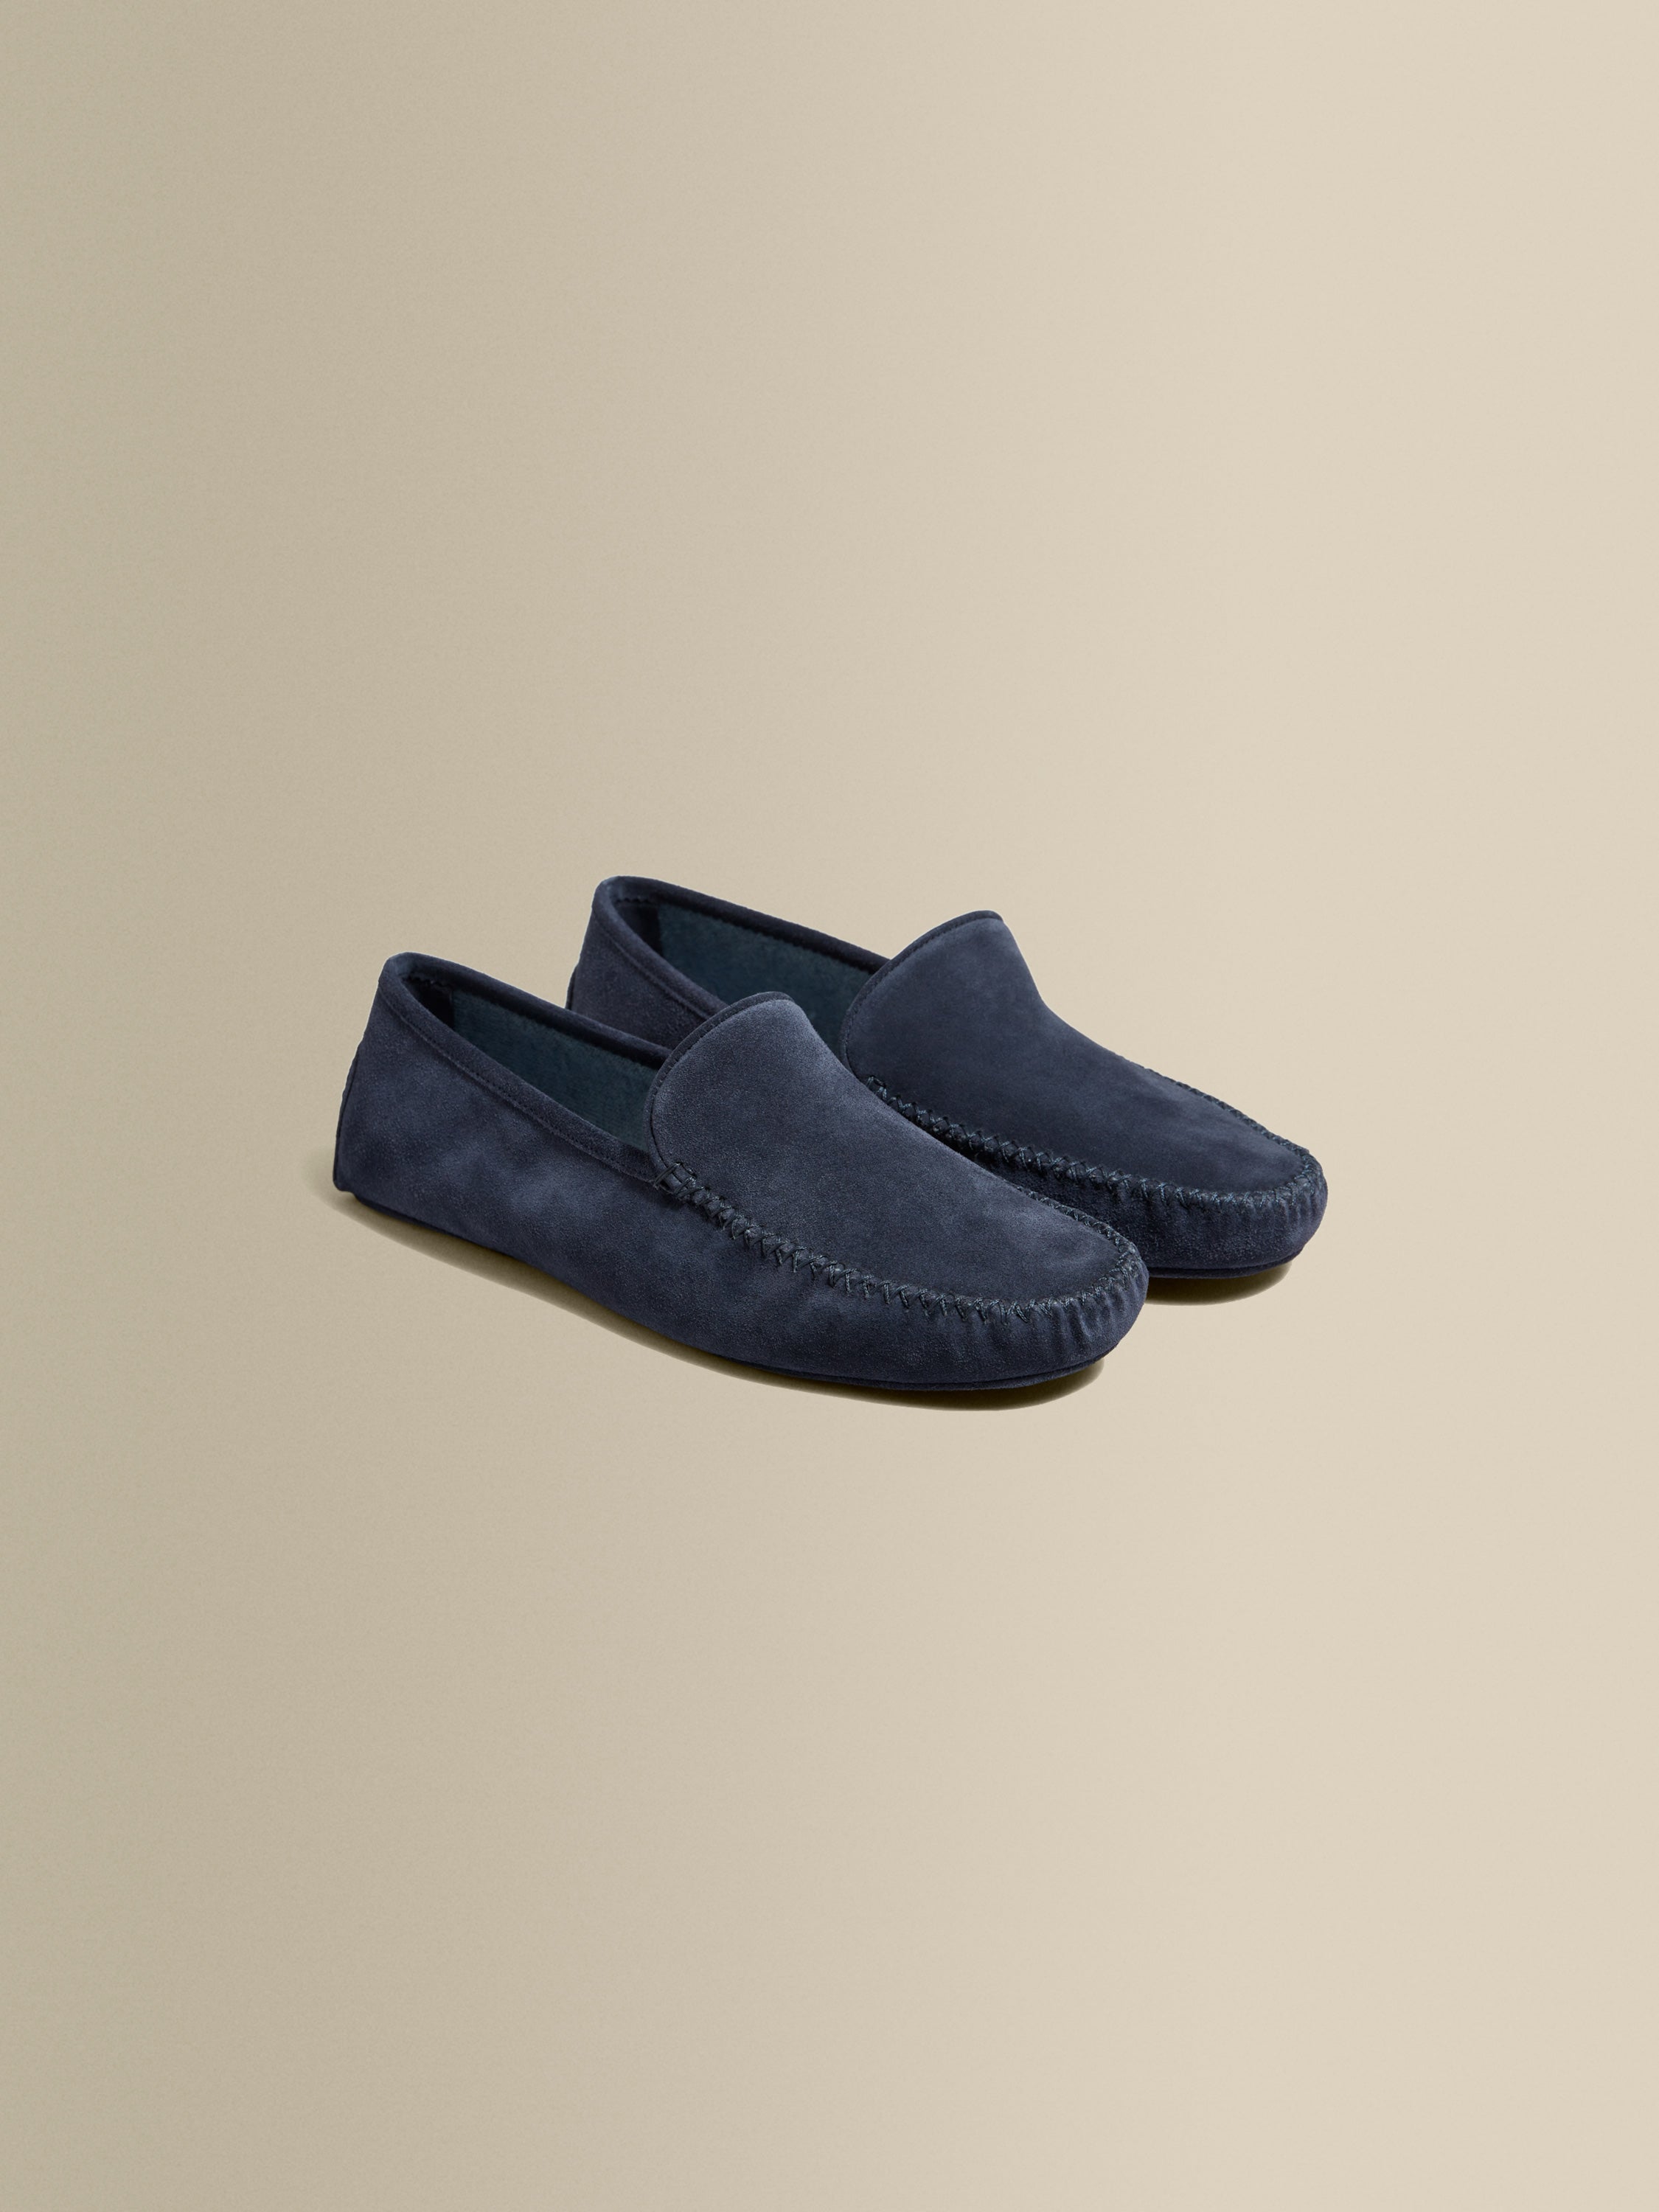 Cashmere Lined Suede Slippers Navy Product